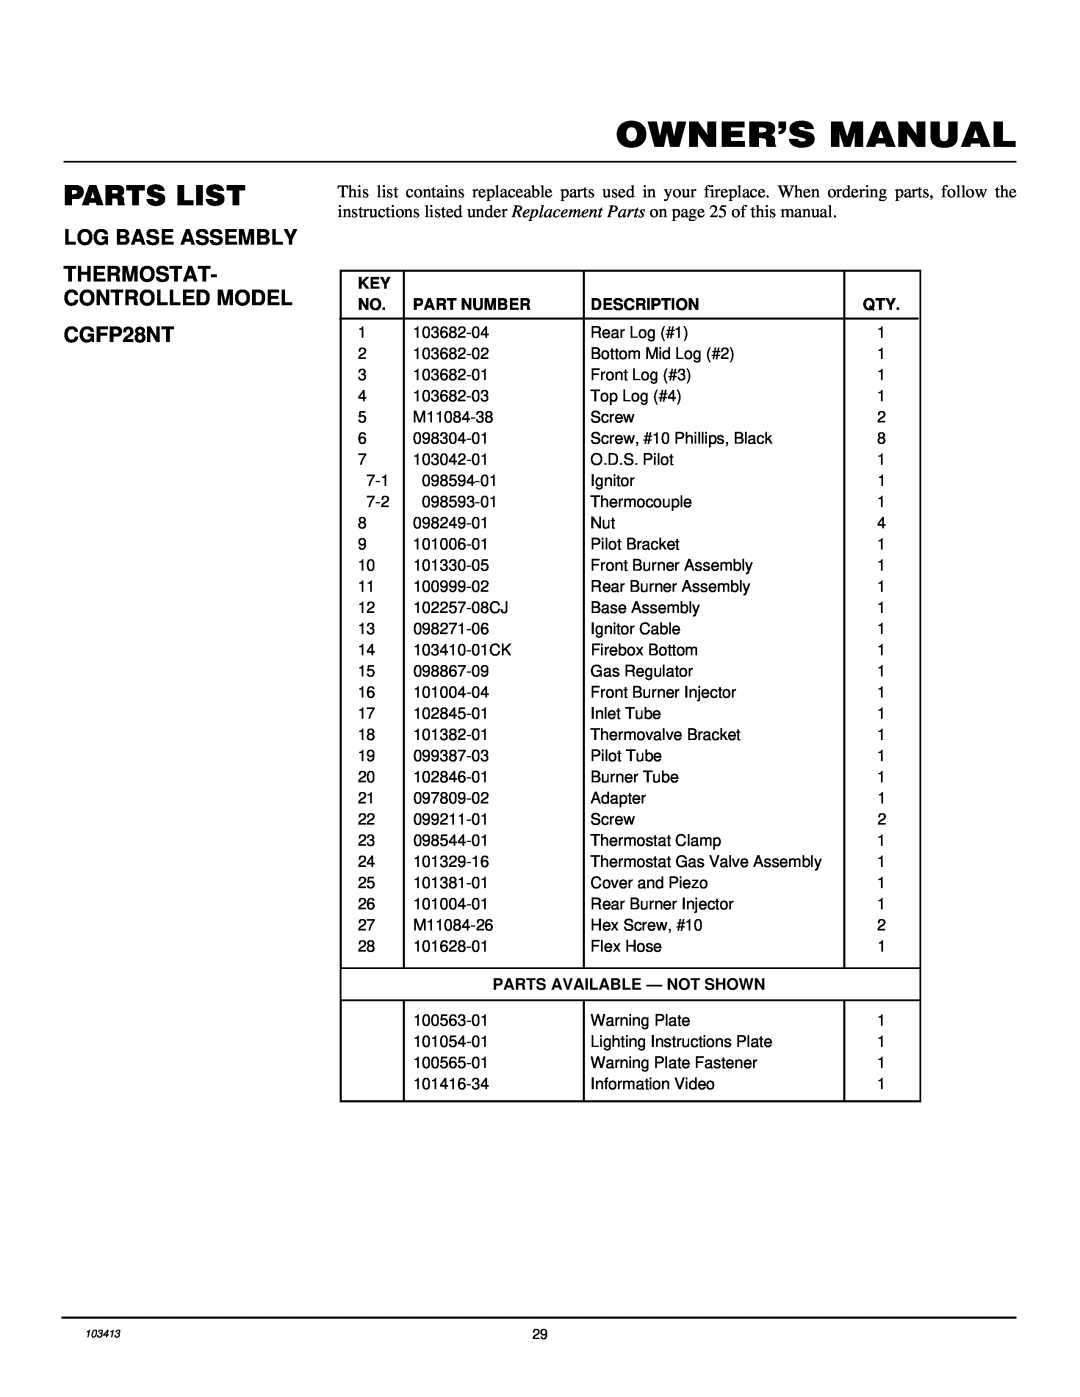 Desa CGFP28NT installation manual Parts List, Log Base Assembly Thermostat- Controlled Model, Part Number, Description 